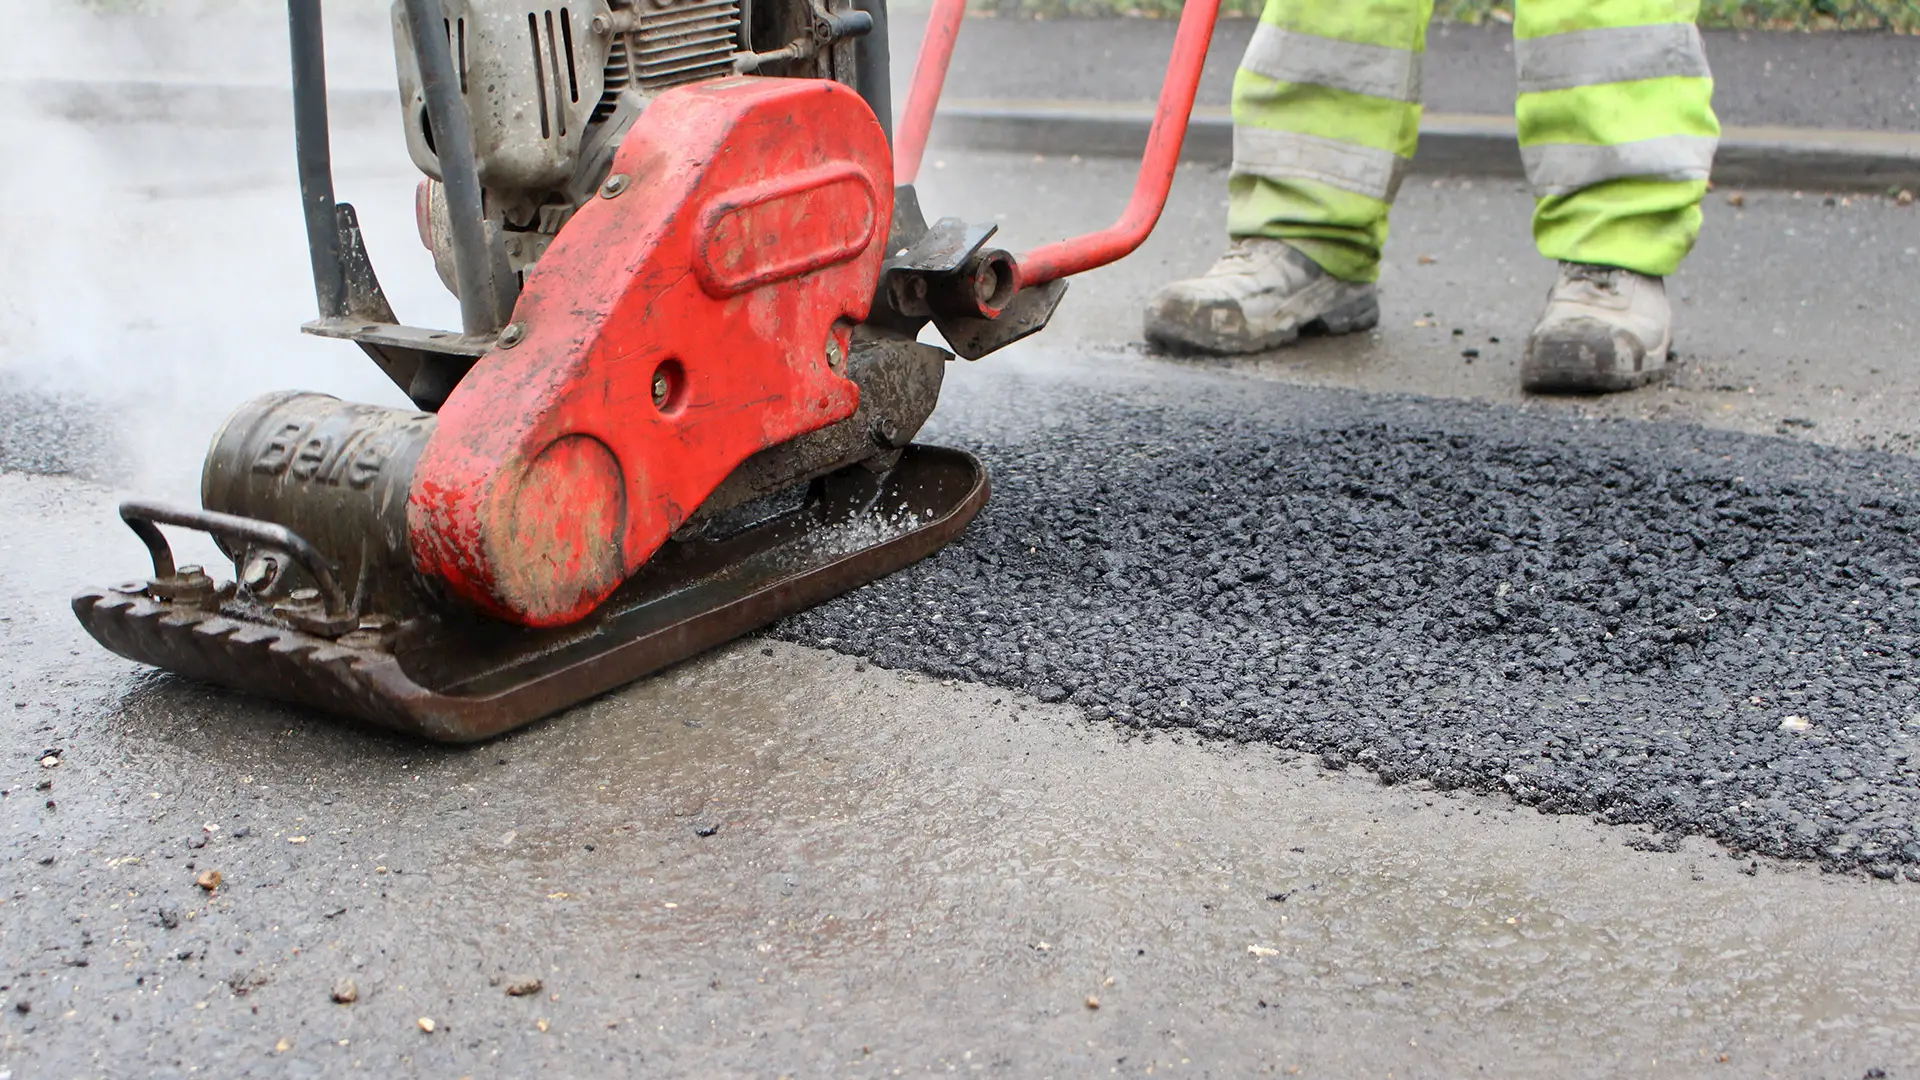 Experienced pothole repair contractors in Rubery